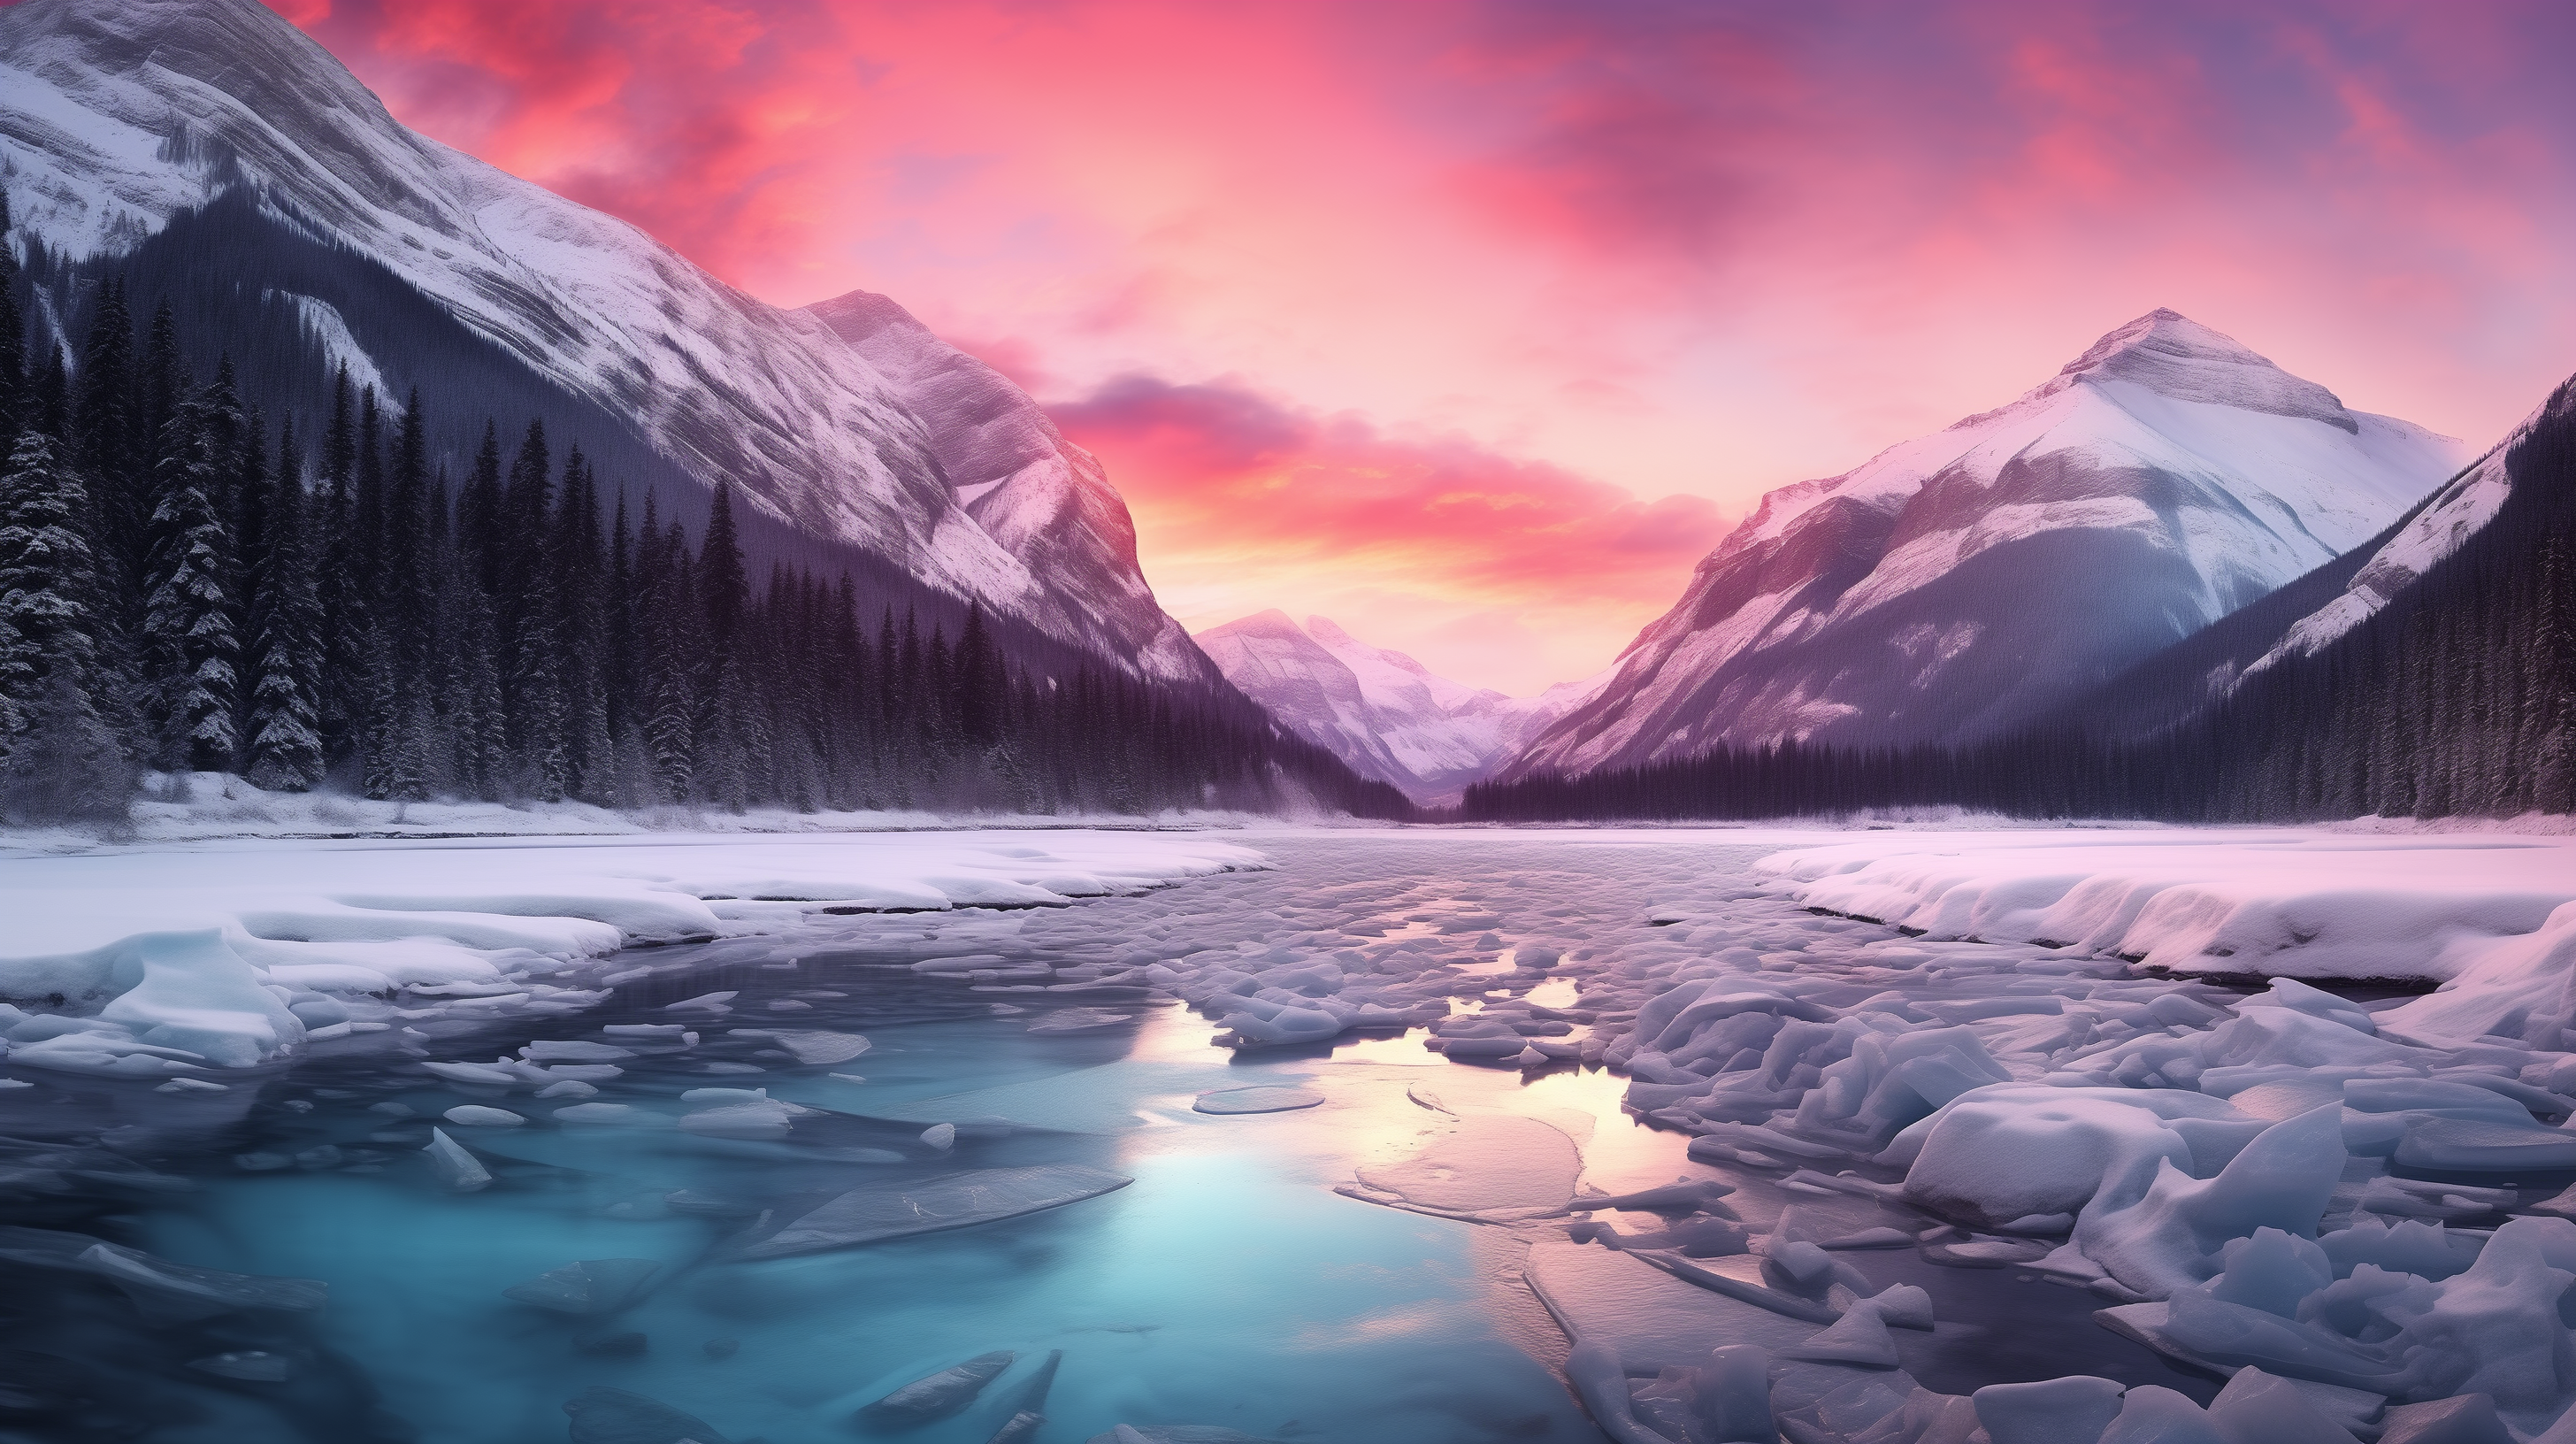 HD wallpaper of a frosty sunrise over a frozen lake with snow-covered mountains and vivid pink skies.